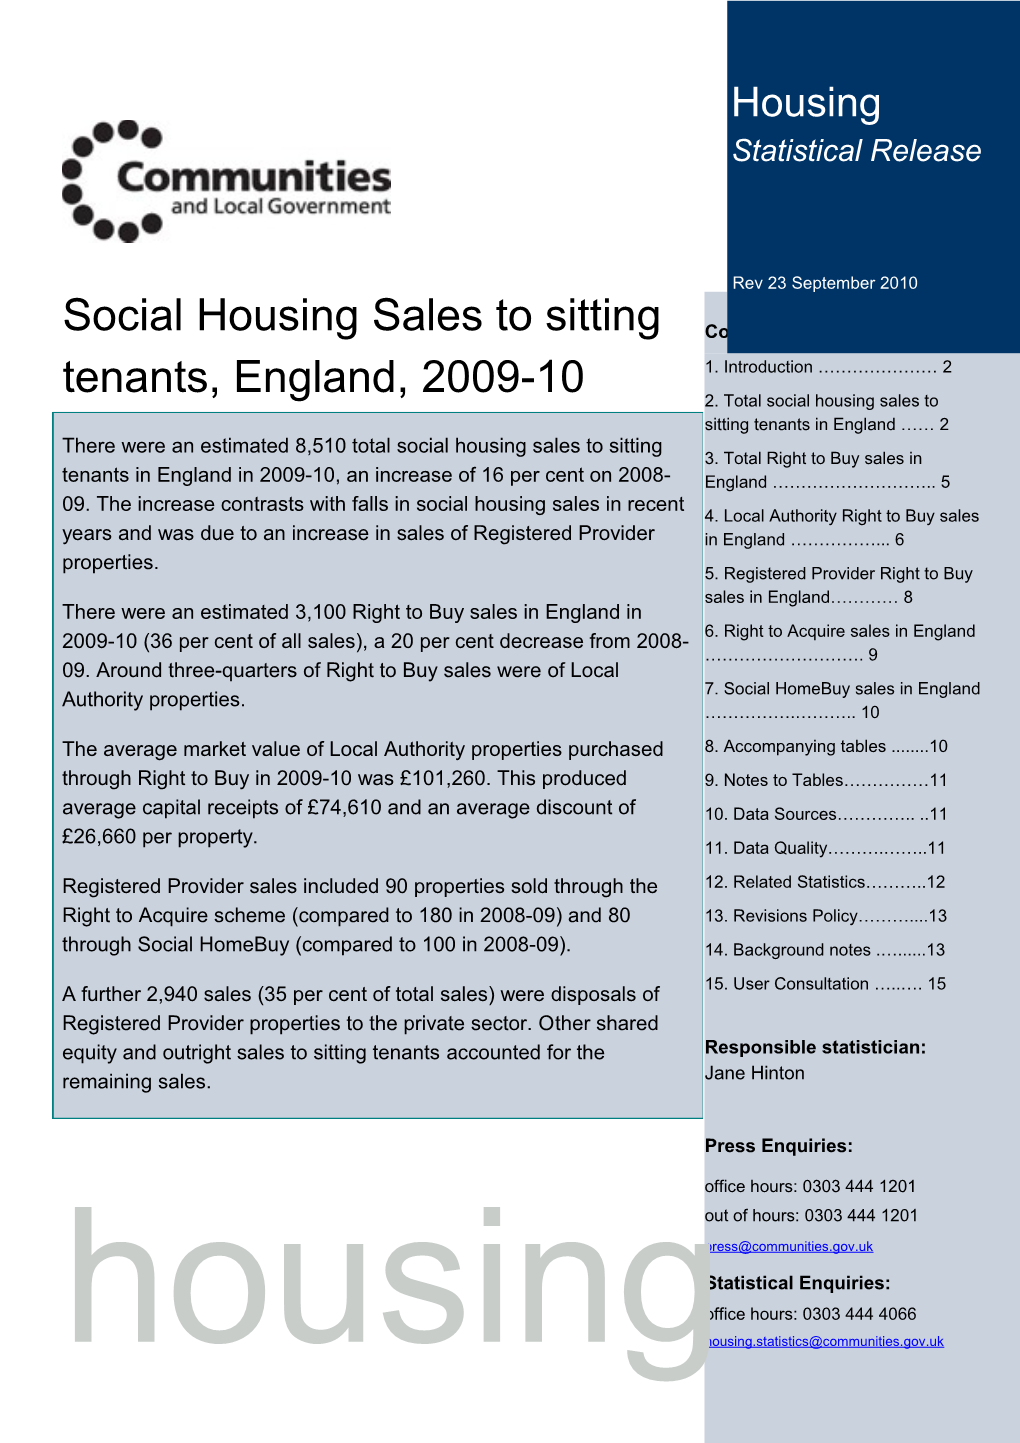 There Were an Estimated 8,510 Total Social Housing Sales to Sitting Tenants in England